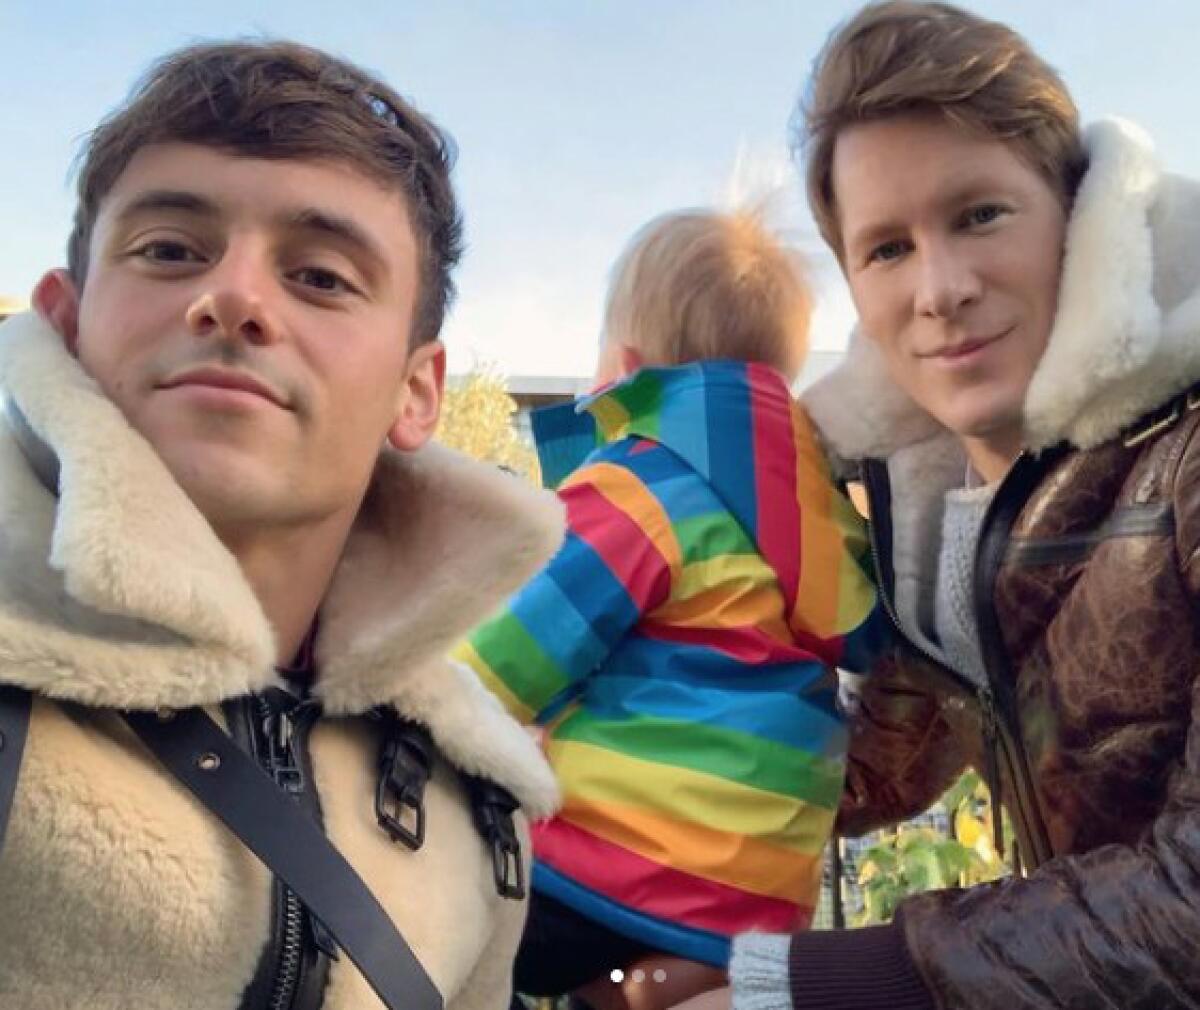 Two men with their baby, who is dressed in a rainbow pattern jacket